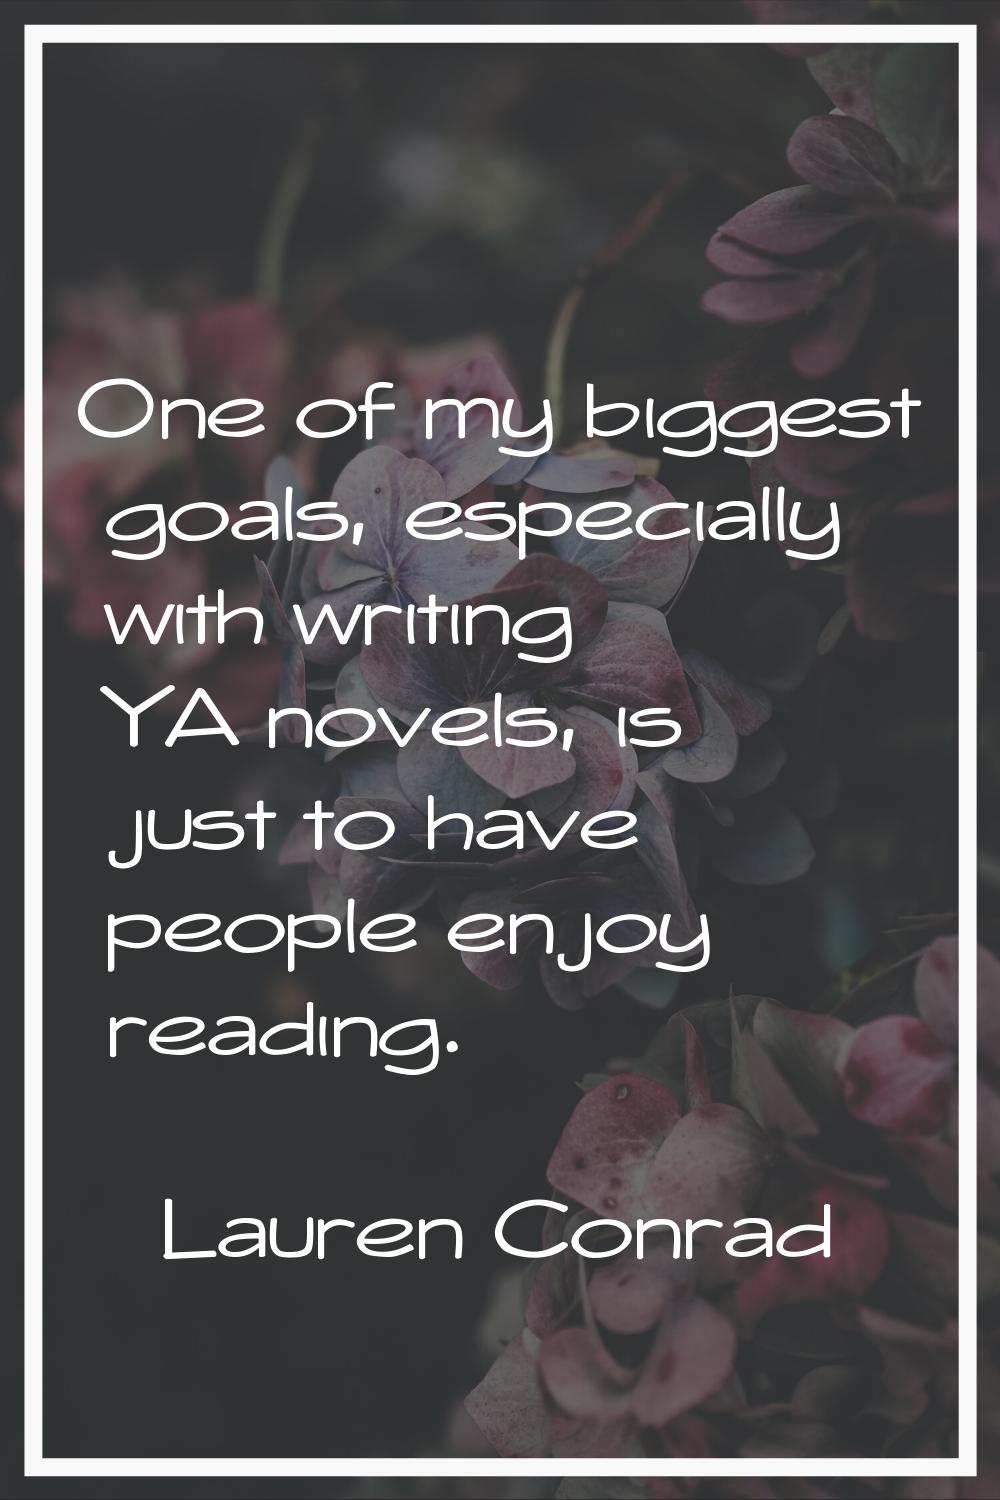 One of my biggest goals, especially with writing YA novels, is just to have people enjoy reading.